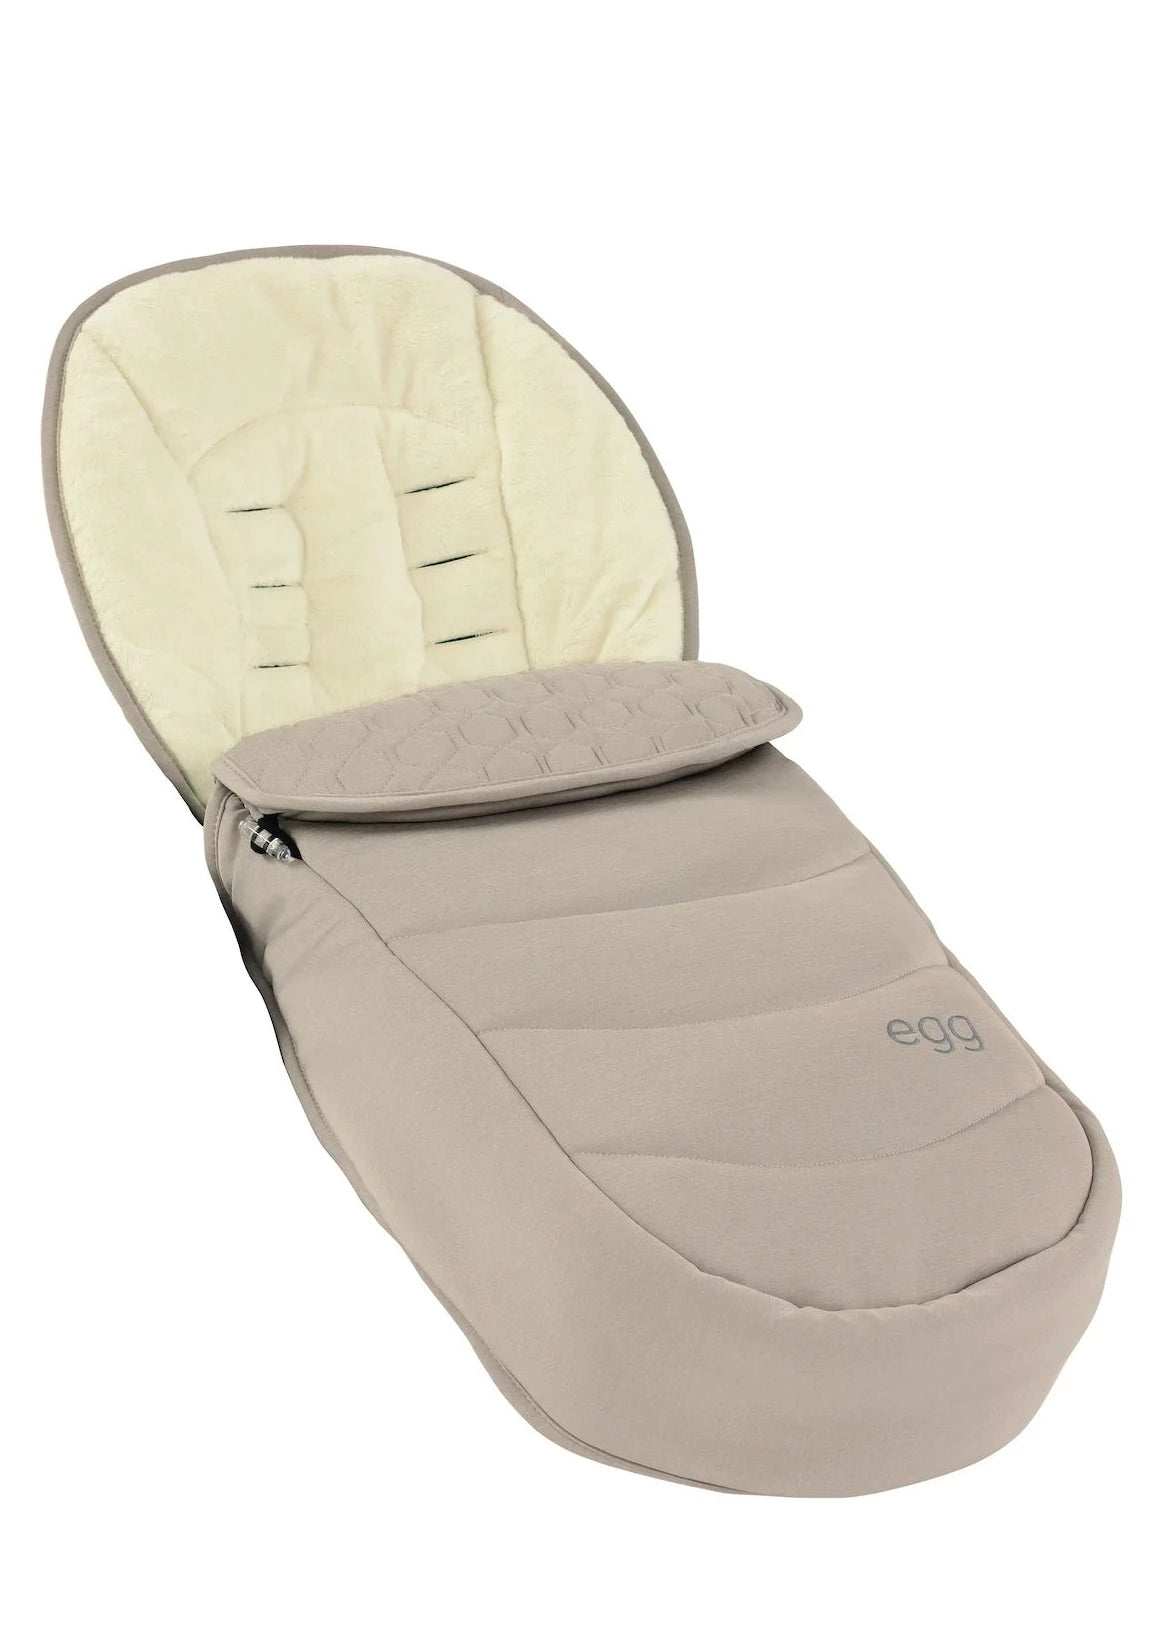 Egg 2 Feather Travel System